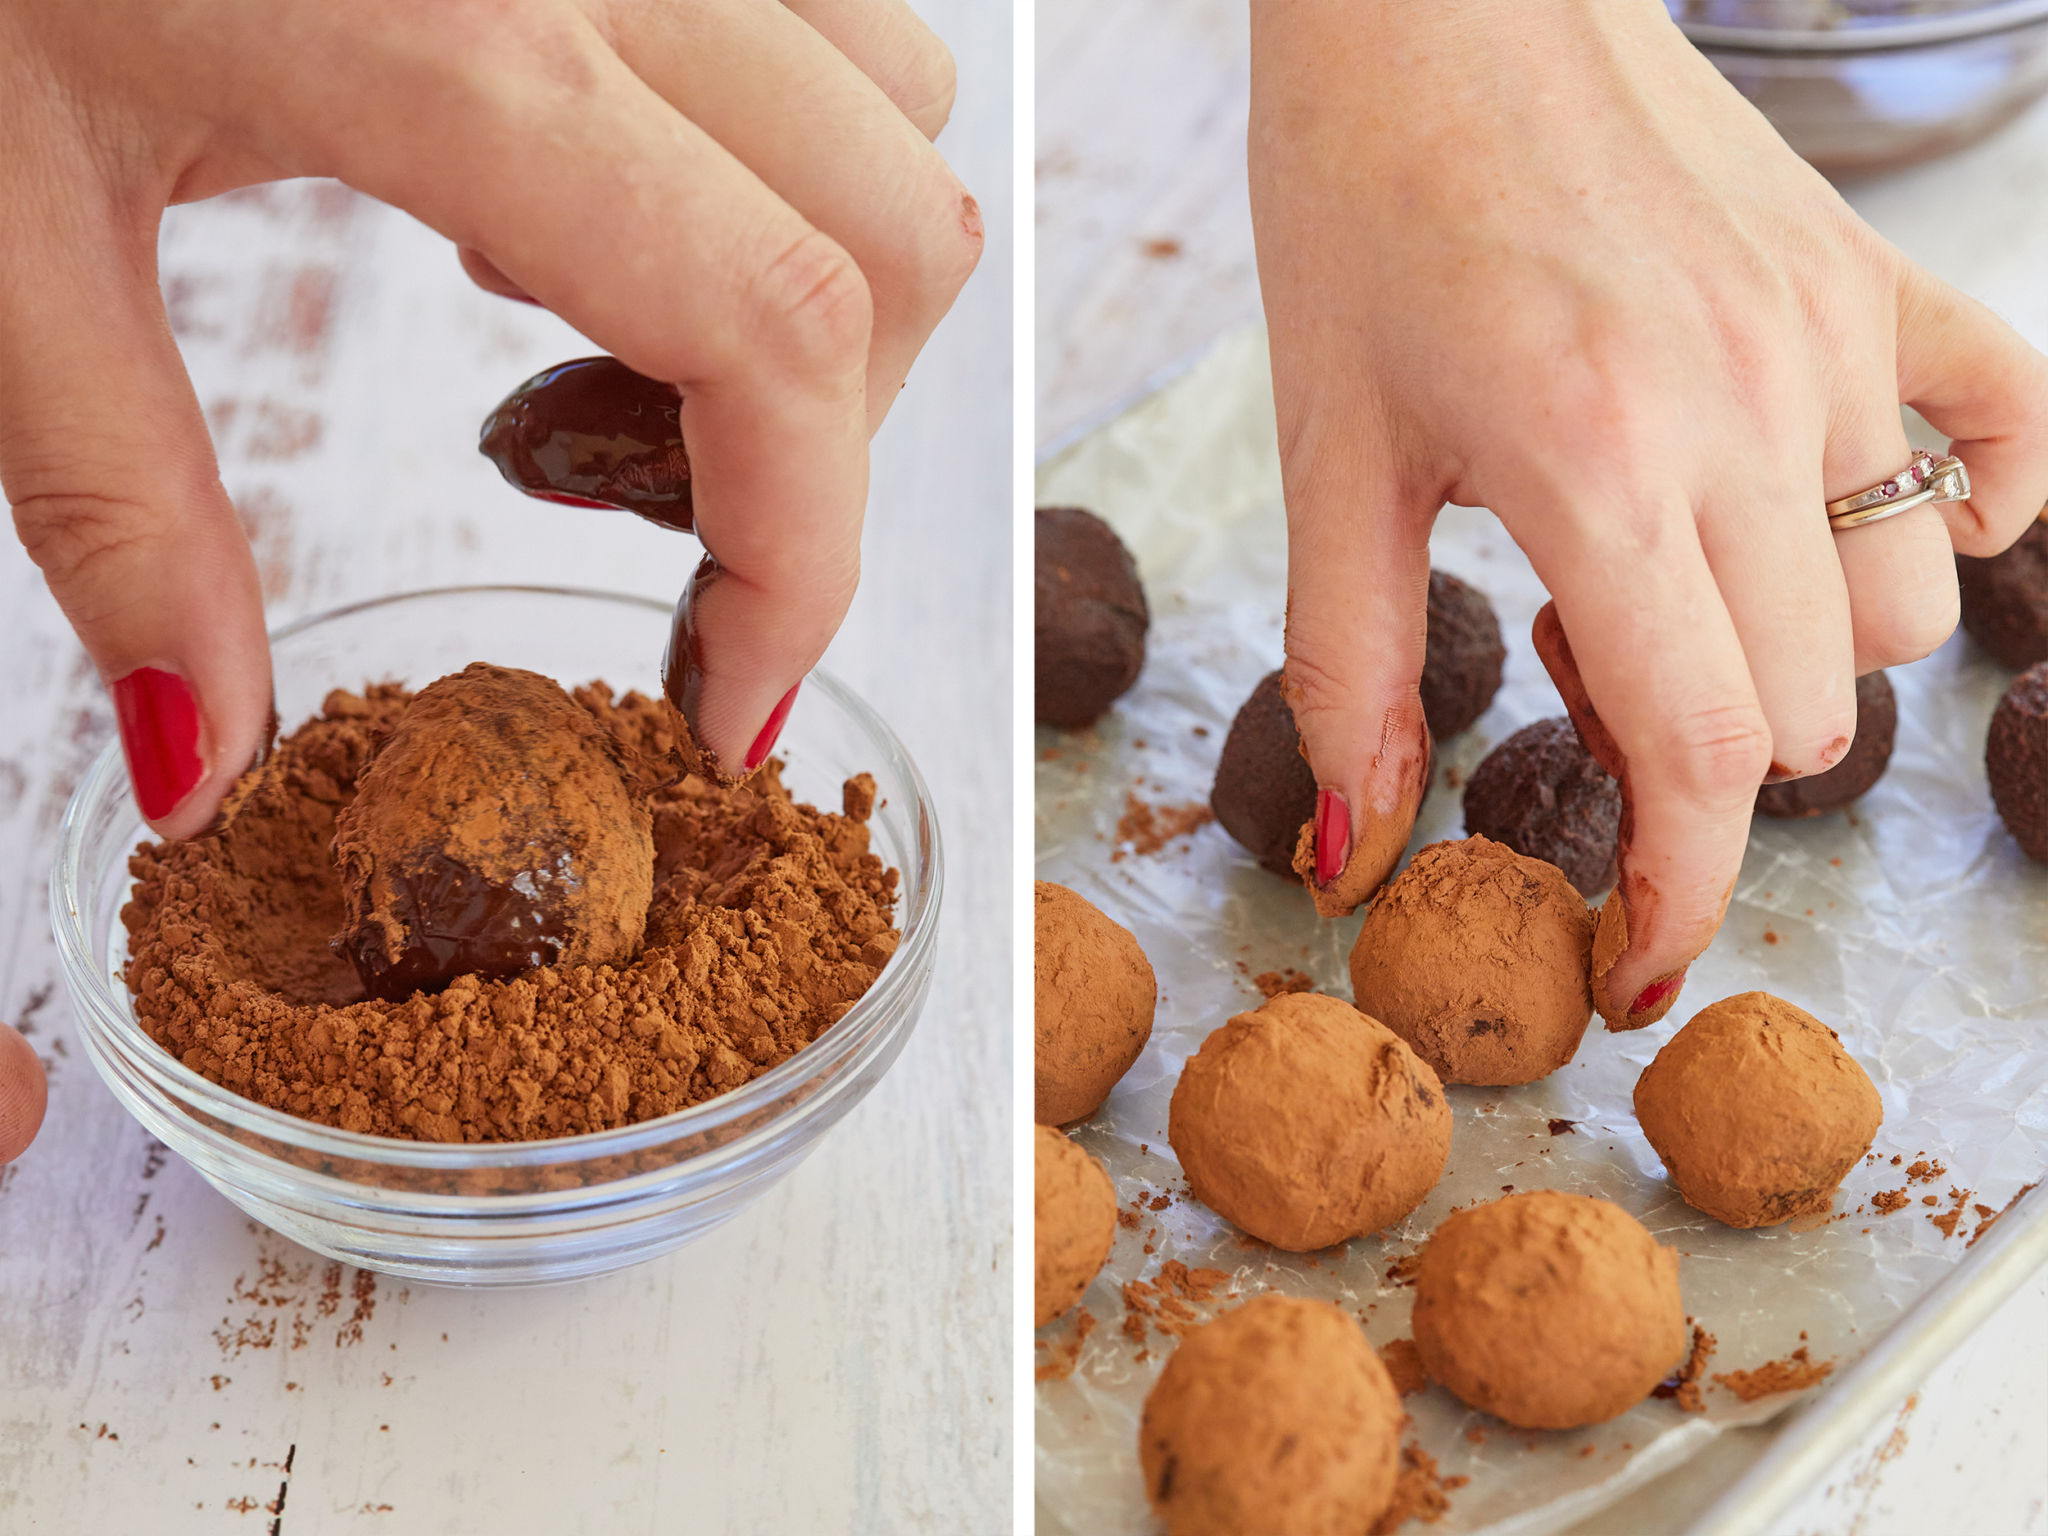 Rolling the chocolate truffles and placing them on the baking sheet.